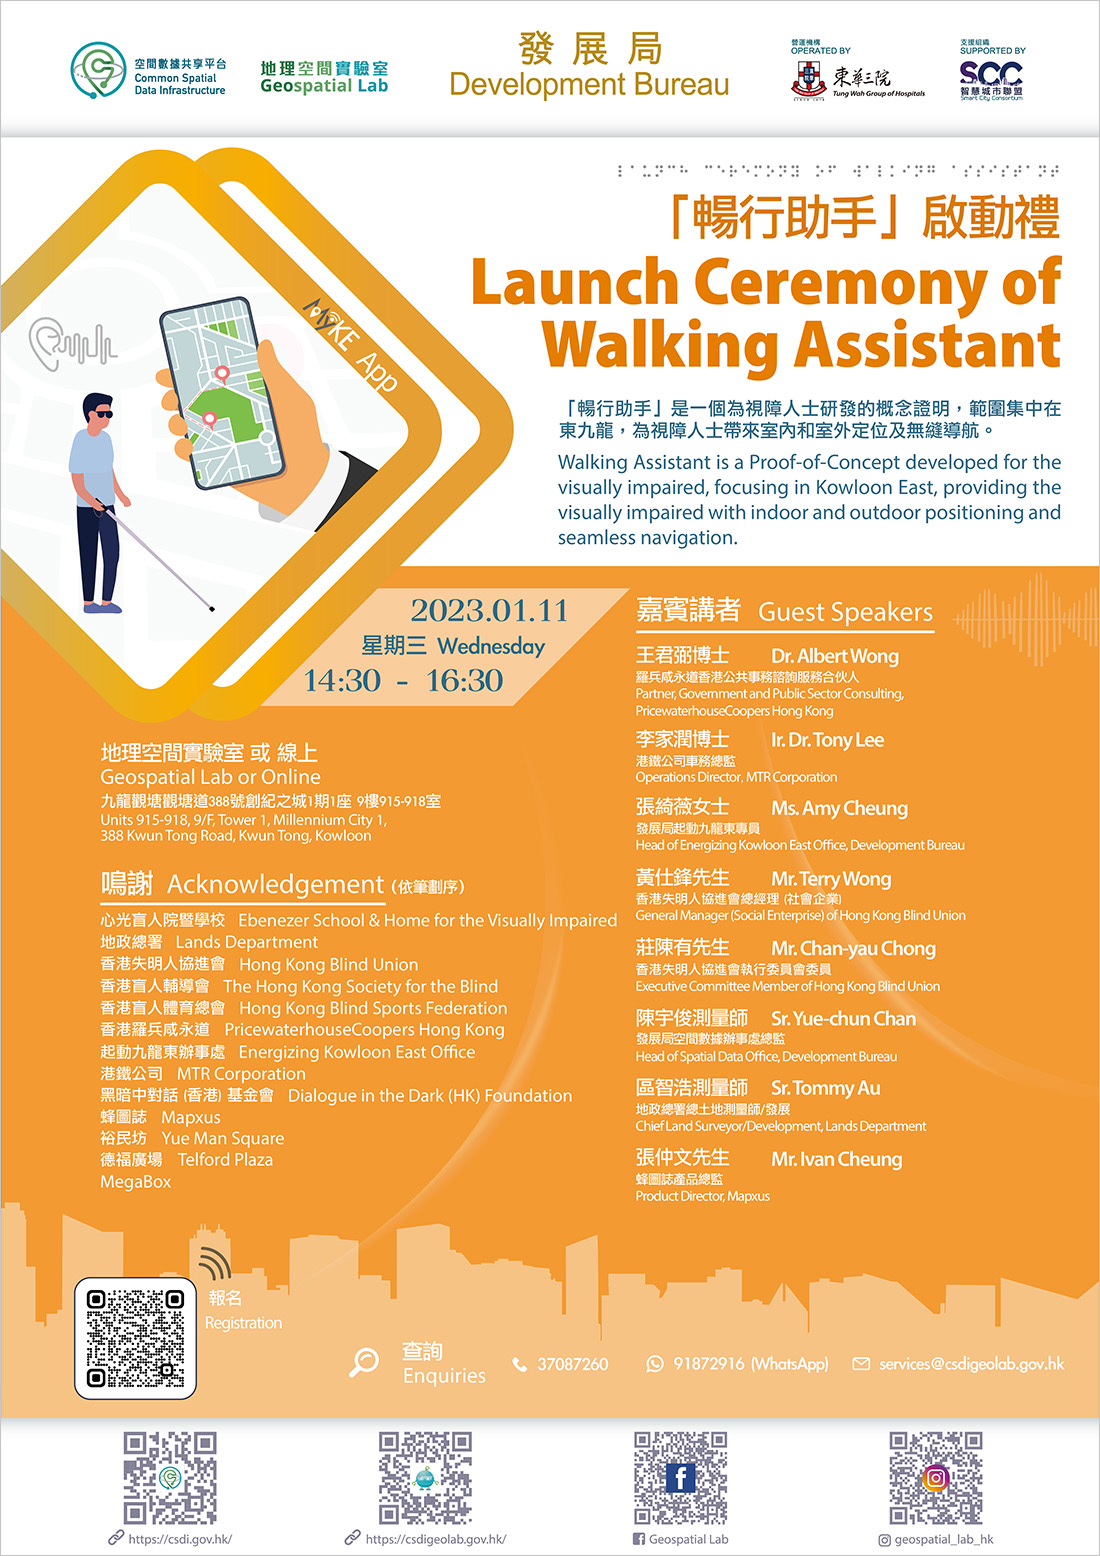 Poster of Launch Ceremony of Walking Assistant